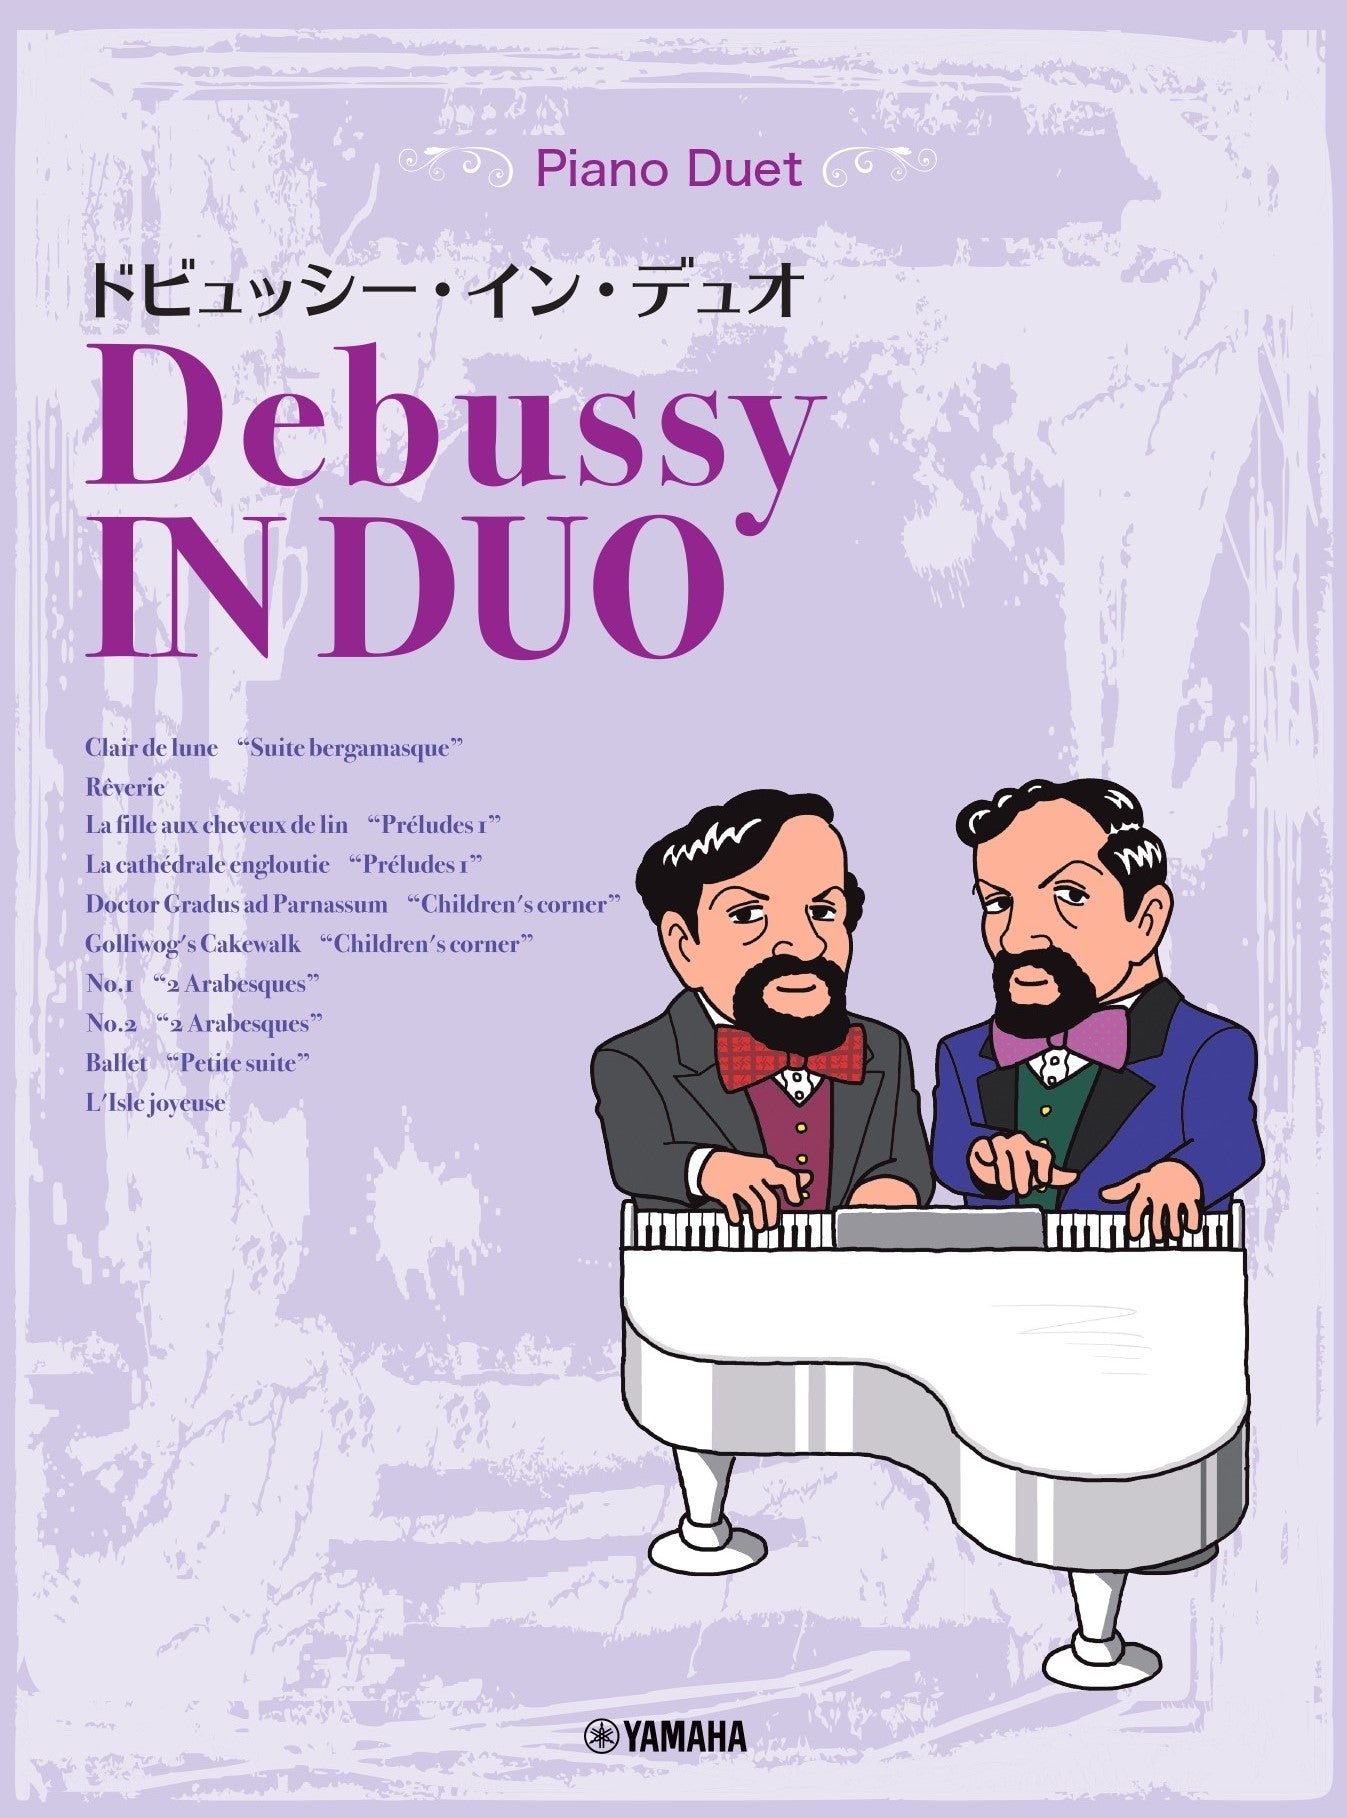 Debussy In DUO ヤマハの楽譜通販サイト Sheet Music Store